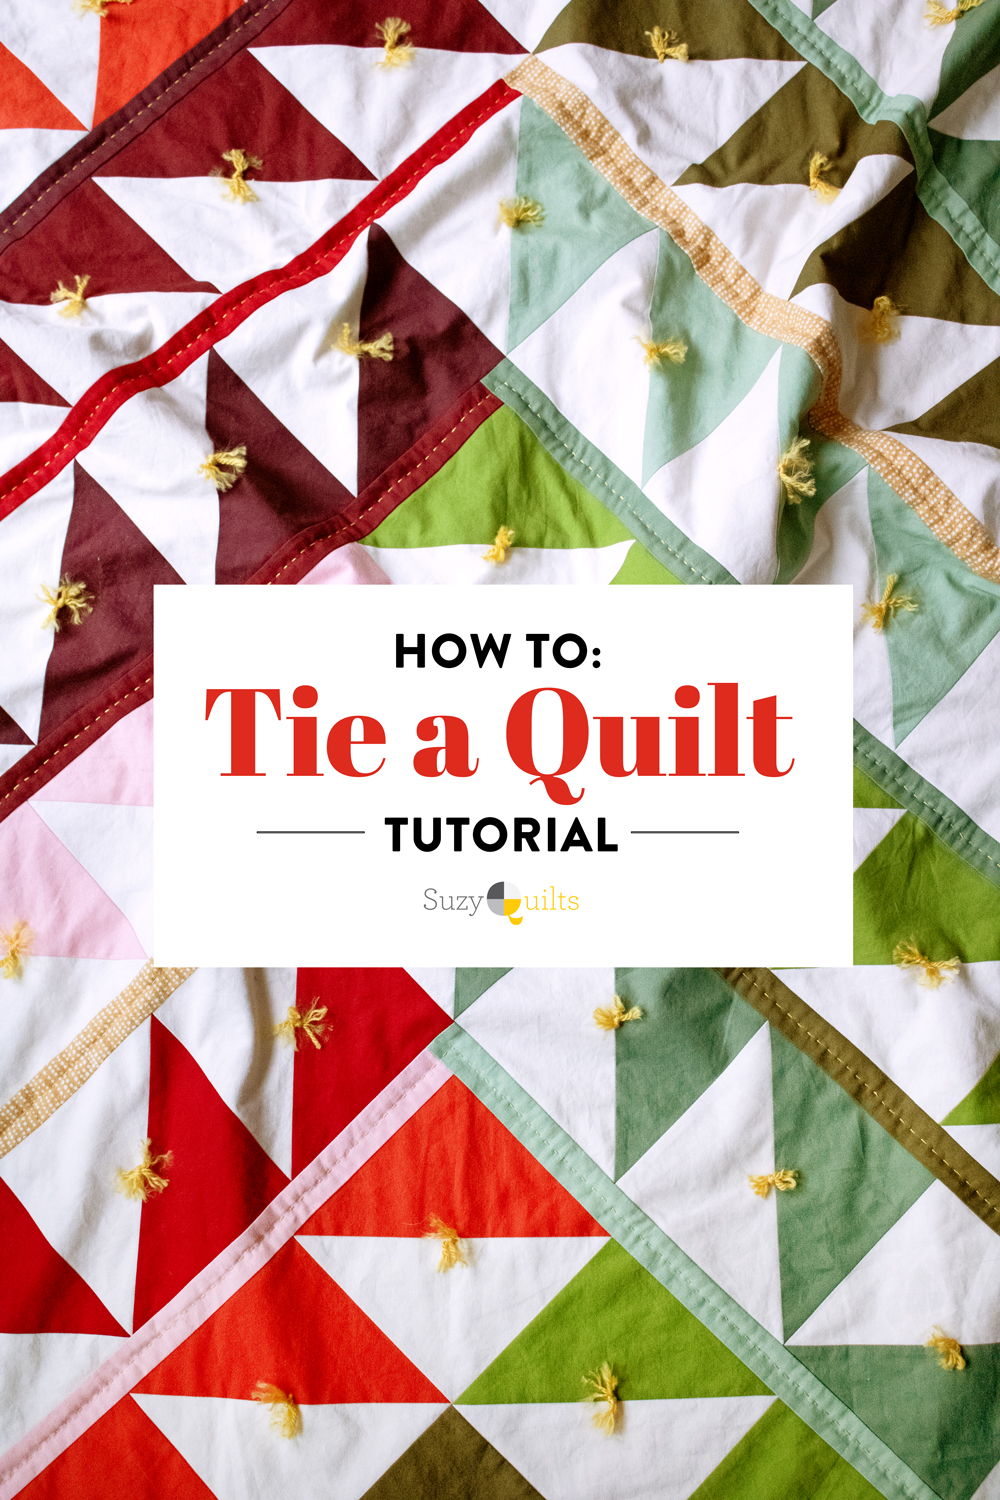 This quilt tying tutorial shows how to tie a quilt with yarn or embroidery thread. Quilt ties is an easy and fast way to finish a quilt. suzyquilts.com #quilting #quiltties